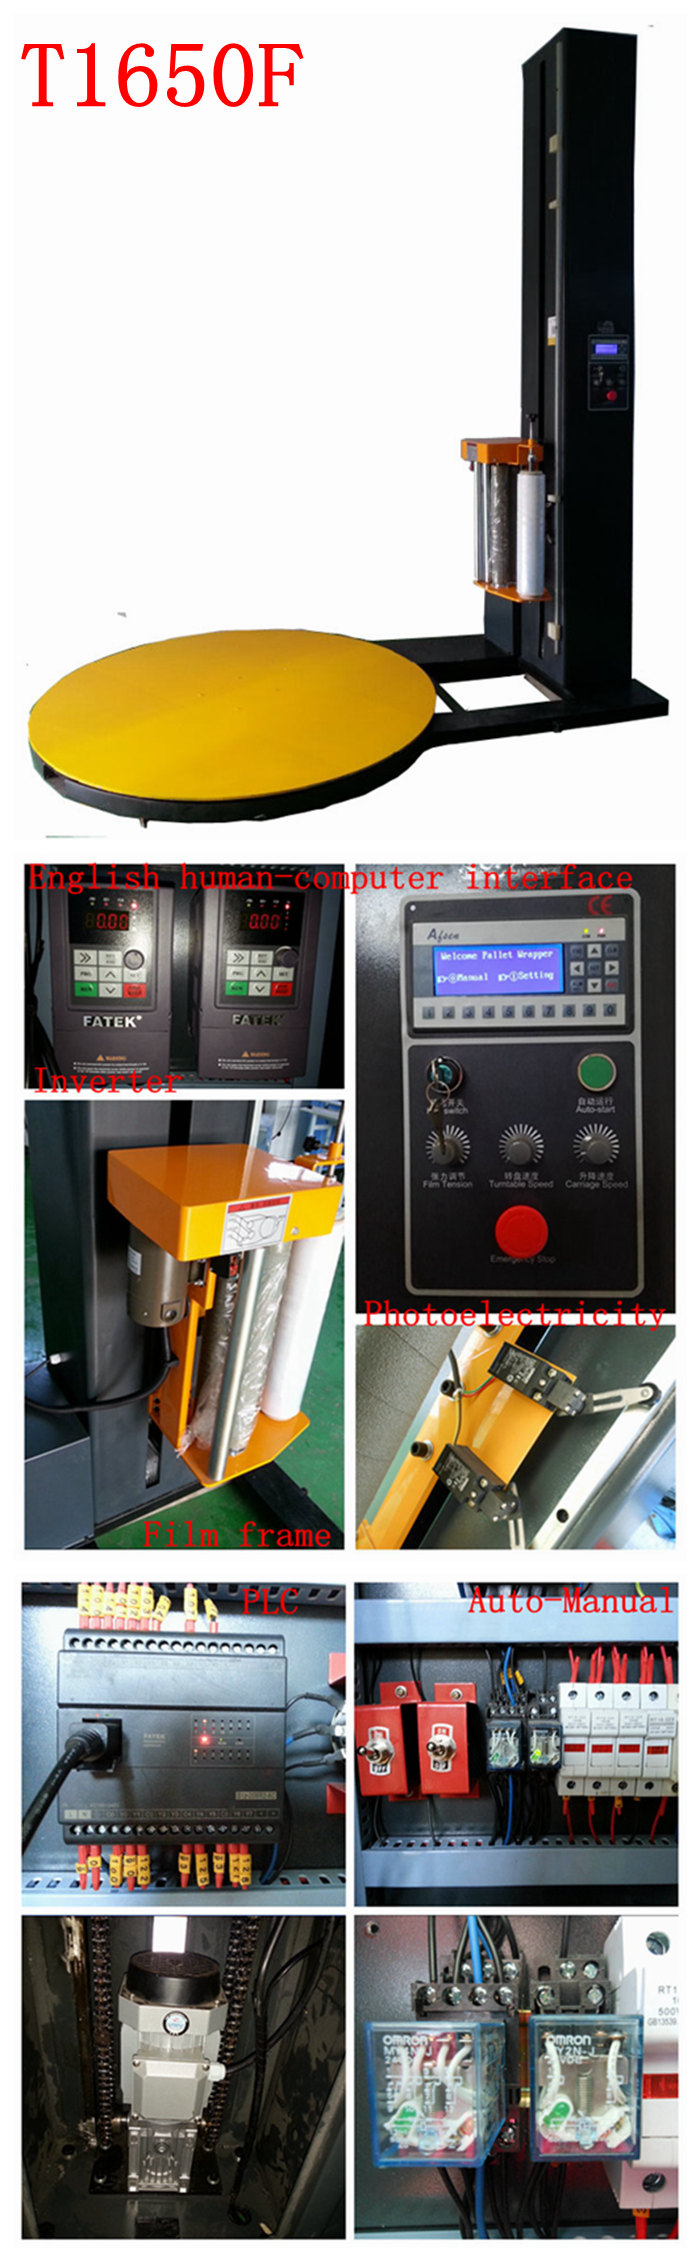 Yupack Automatic Pallet Stretch Wrapper Machine&Pallet Stretch Wrapping Machines